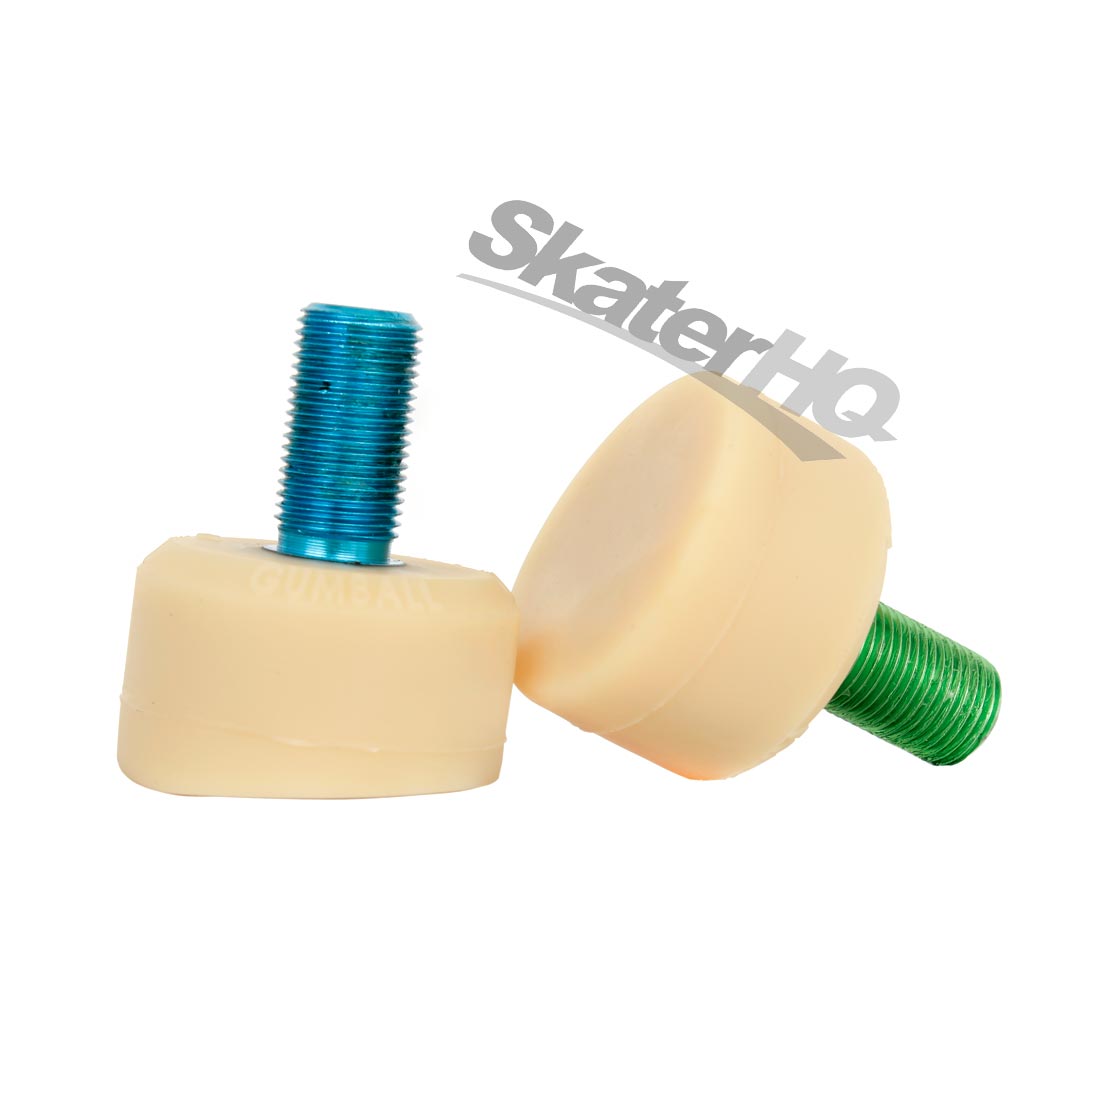 Gumball Toe Stops - Long/Standard - Natural 75A Roller Skate Hardware and Parts